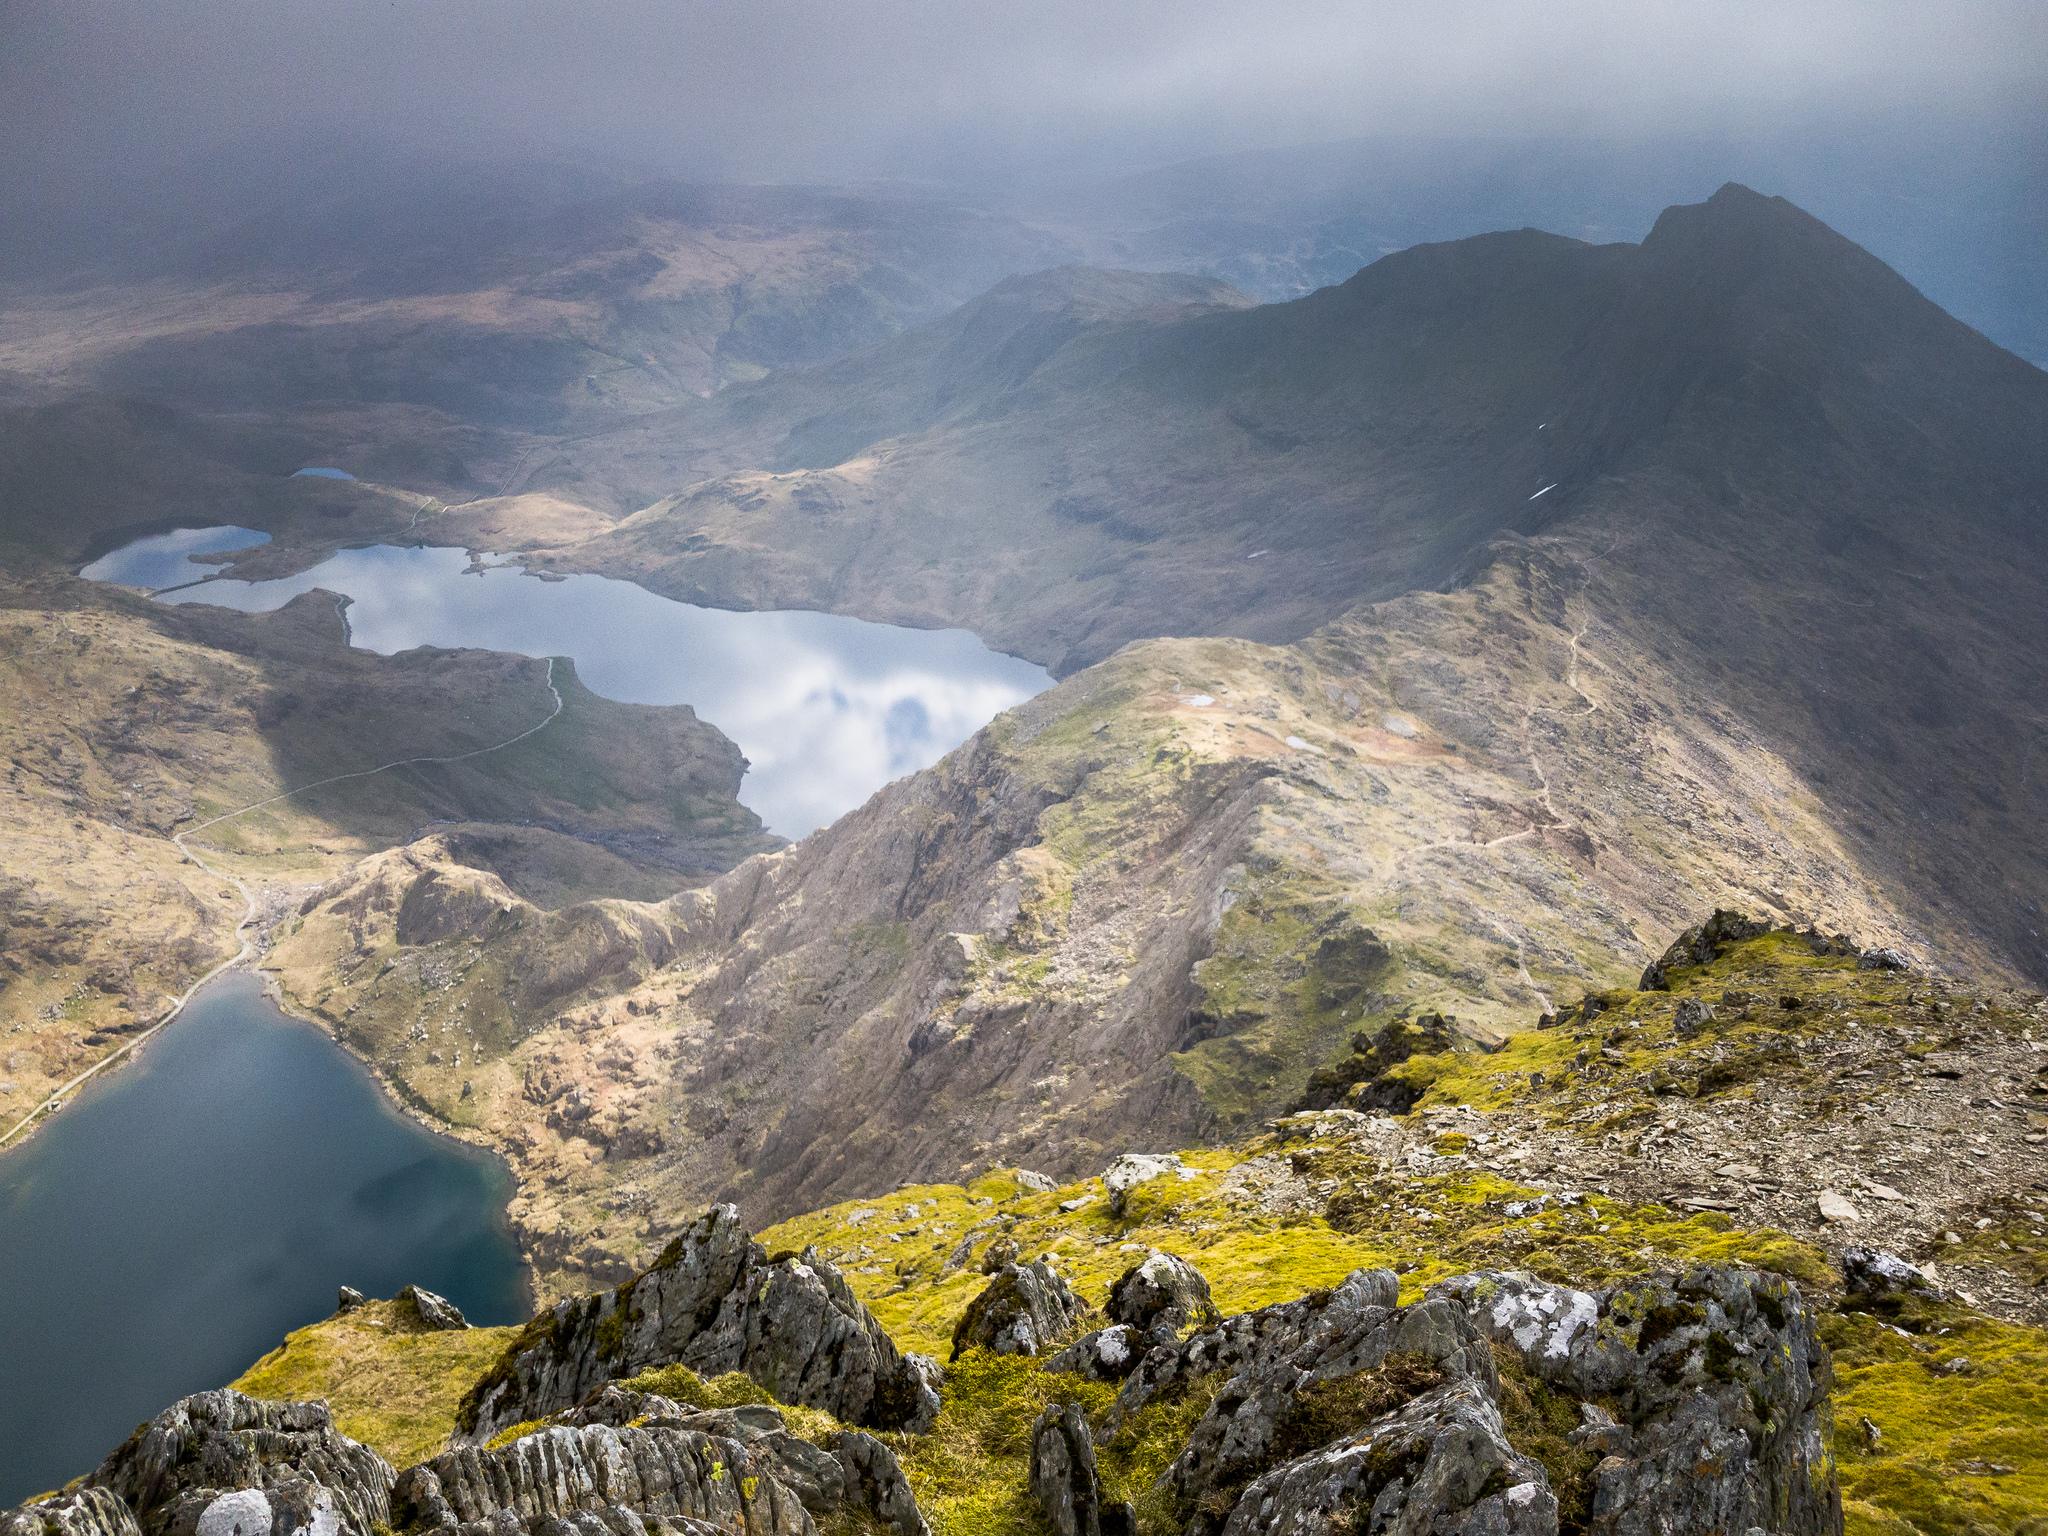 Snowdonia, Scottish Highlands and Loch Ness: The 20 best views in